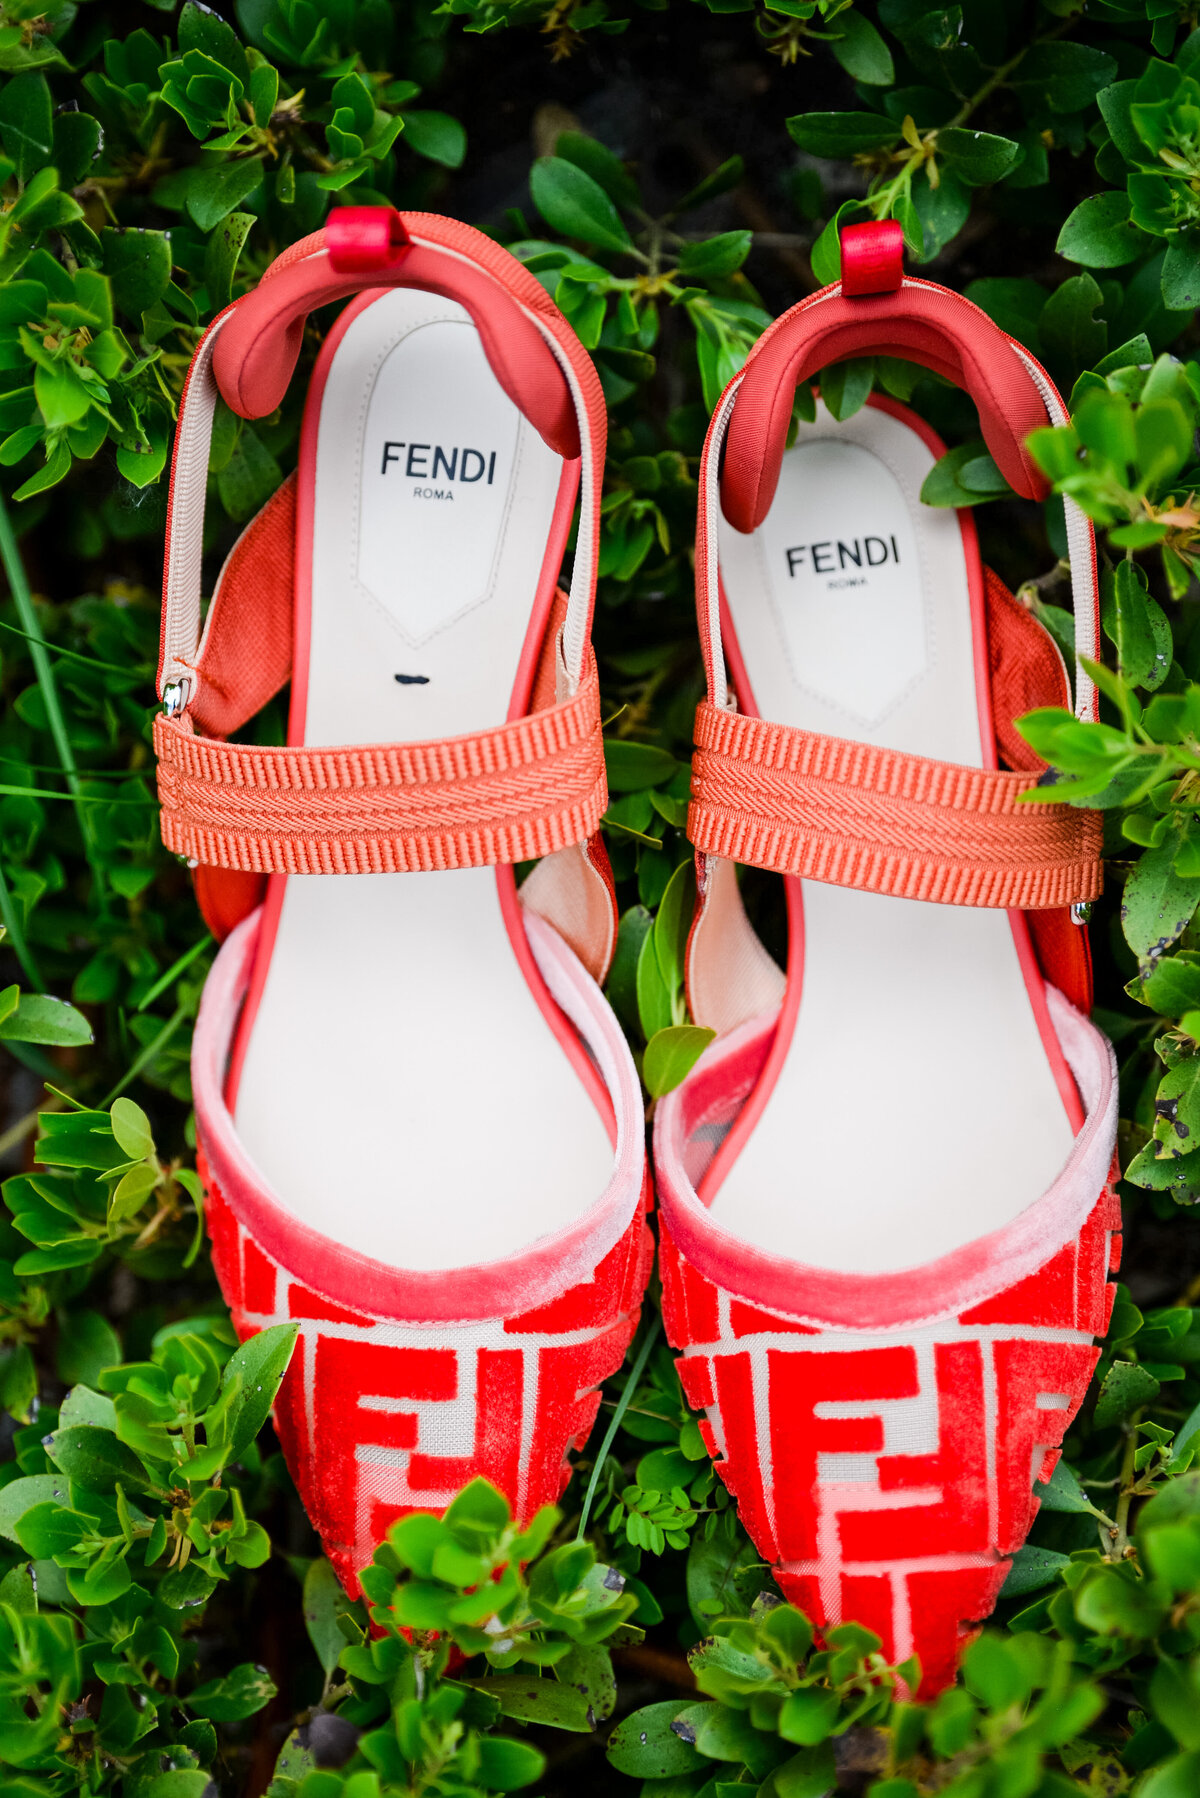 A pair of bright red Fendi heels sits in a patch of greenery.